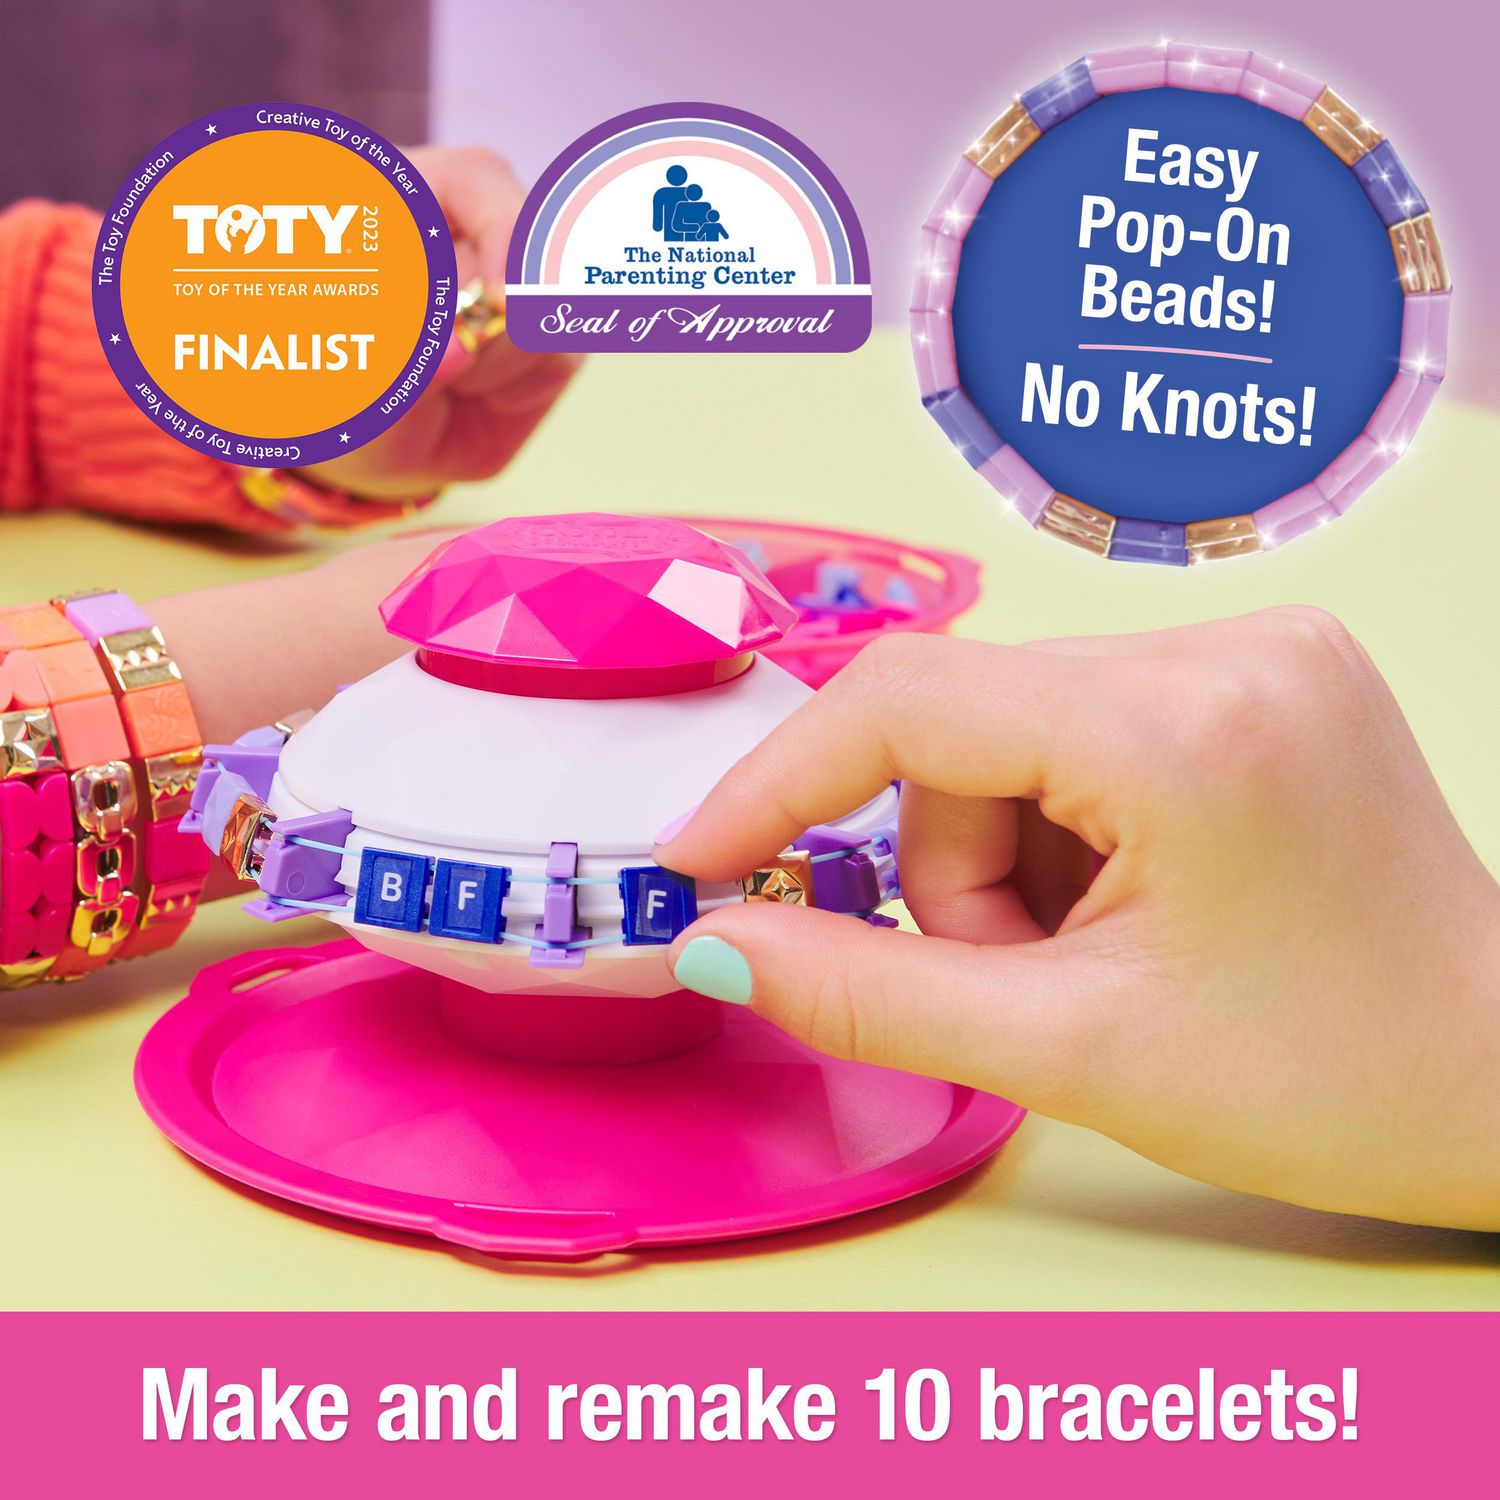 50 of the best jewellery making kits in 2024 - Gathered